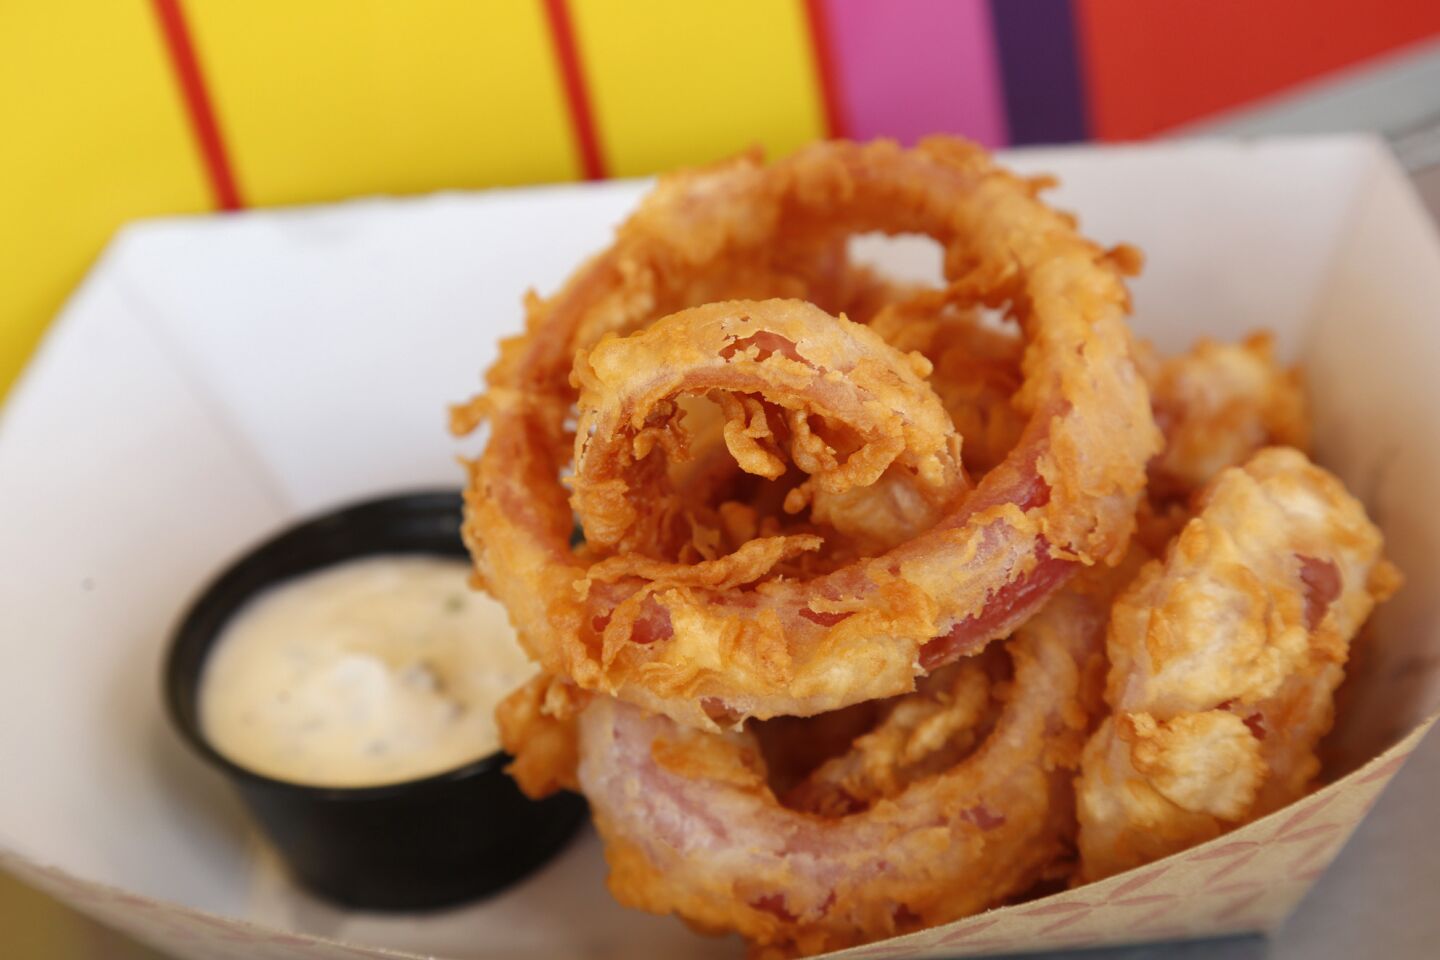 Pickled Red Onion Rings from The Pico House food truck.